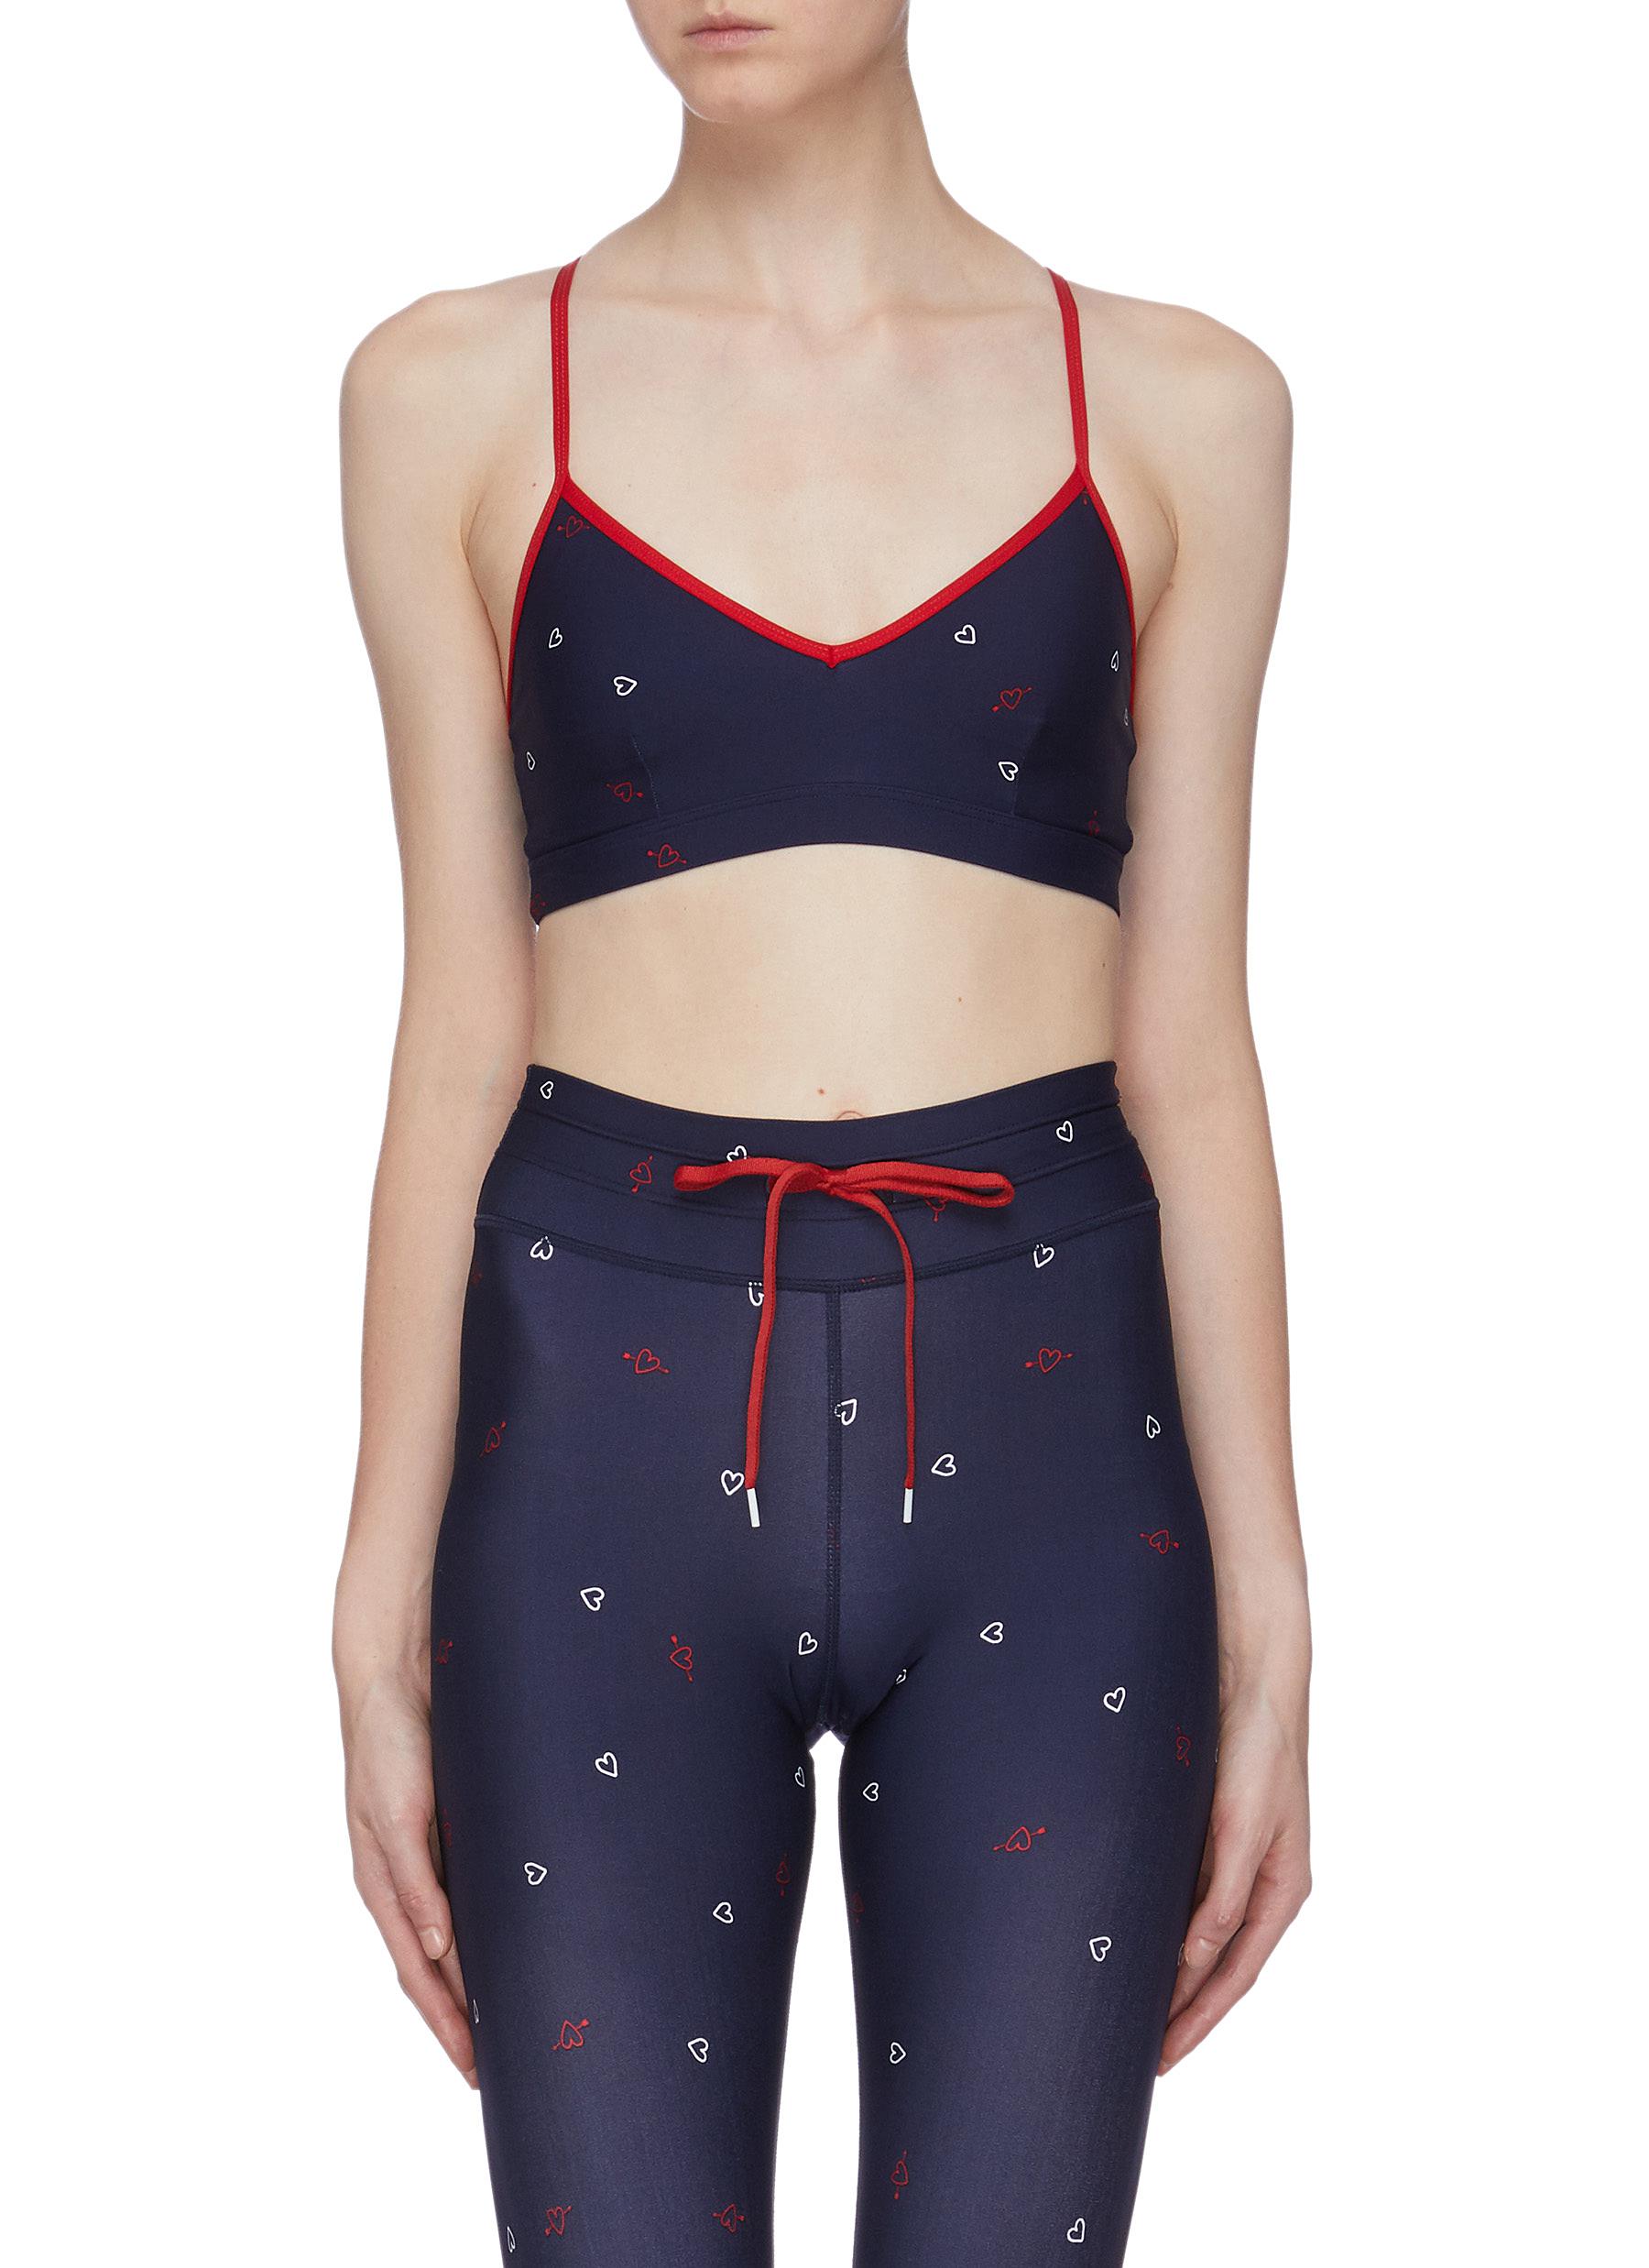 Love Andie heart print sports bra by The Upside